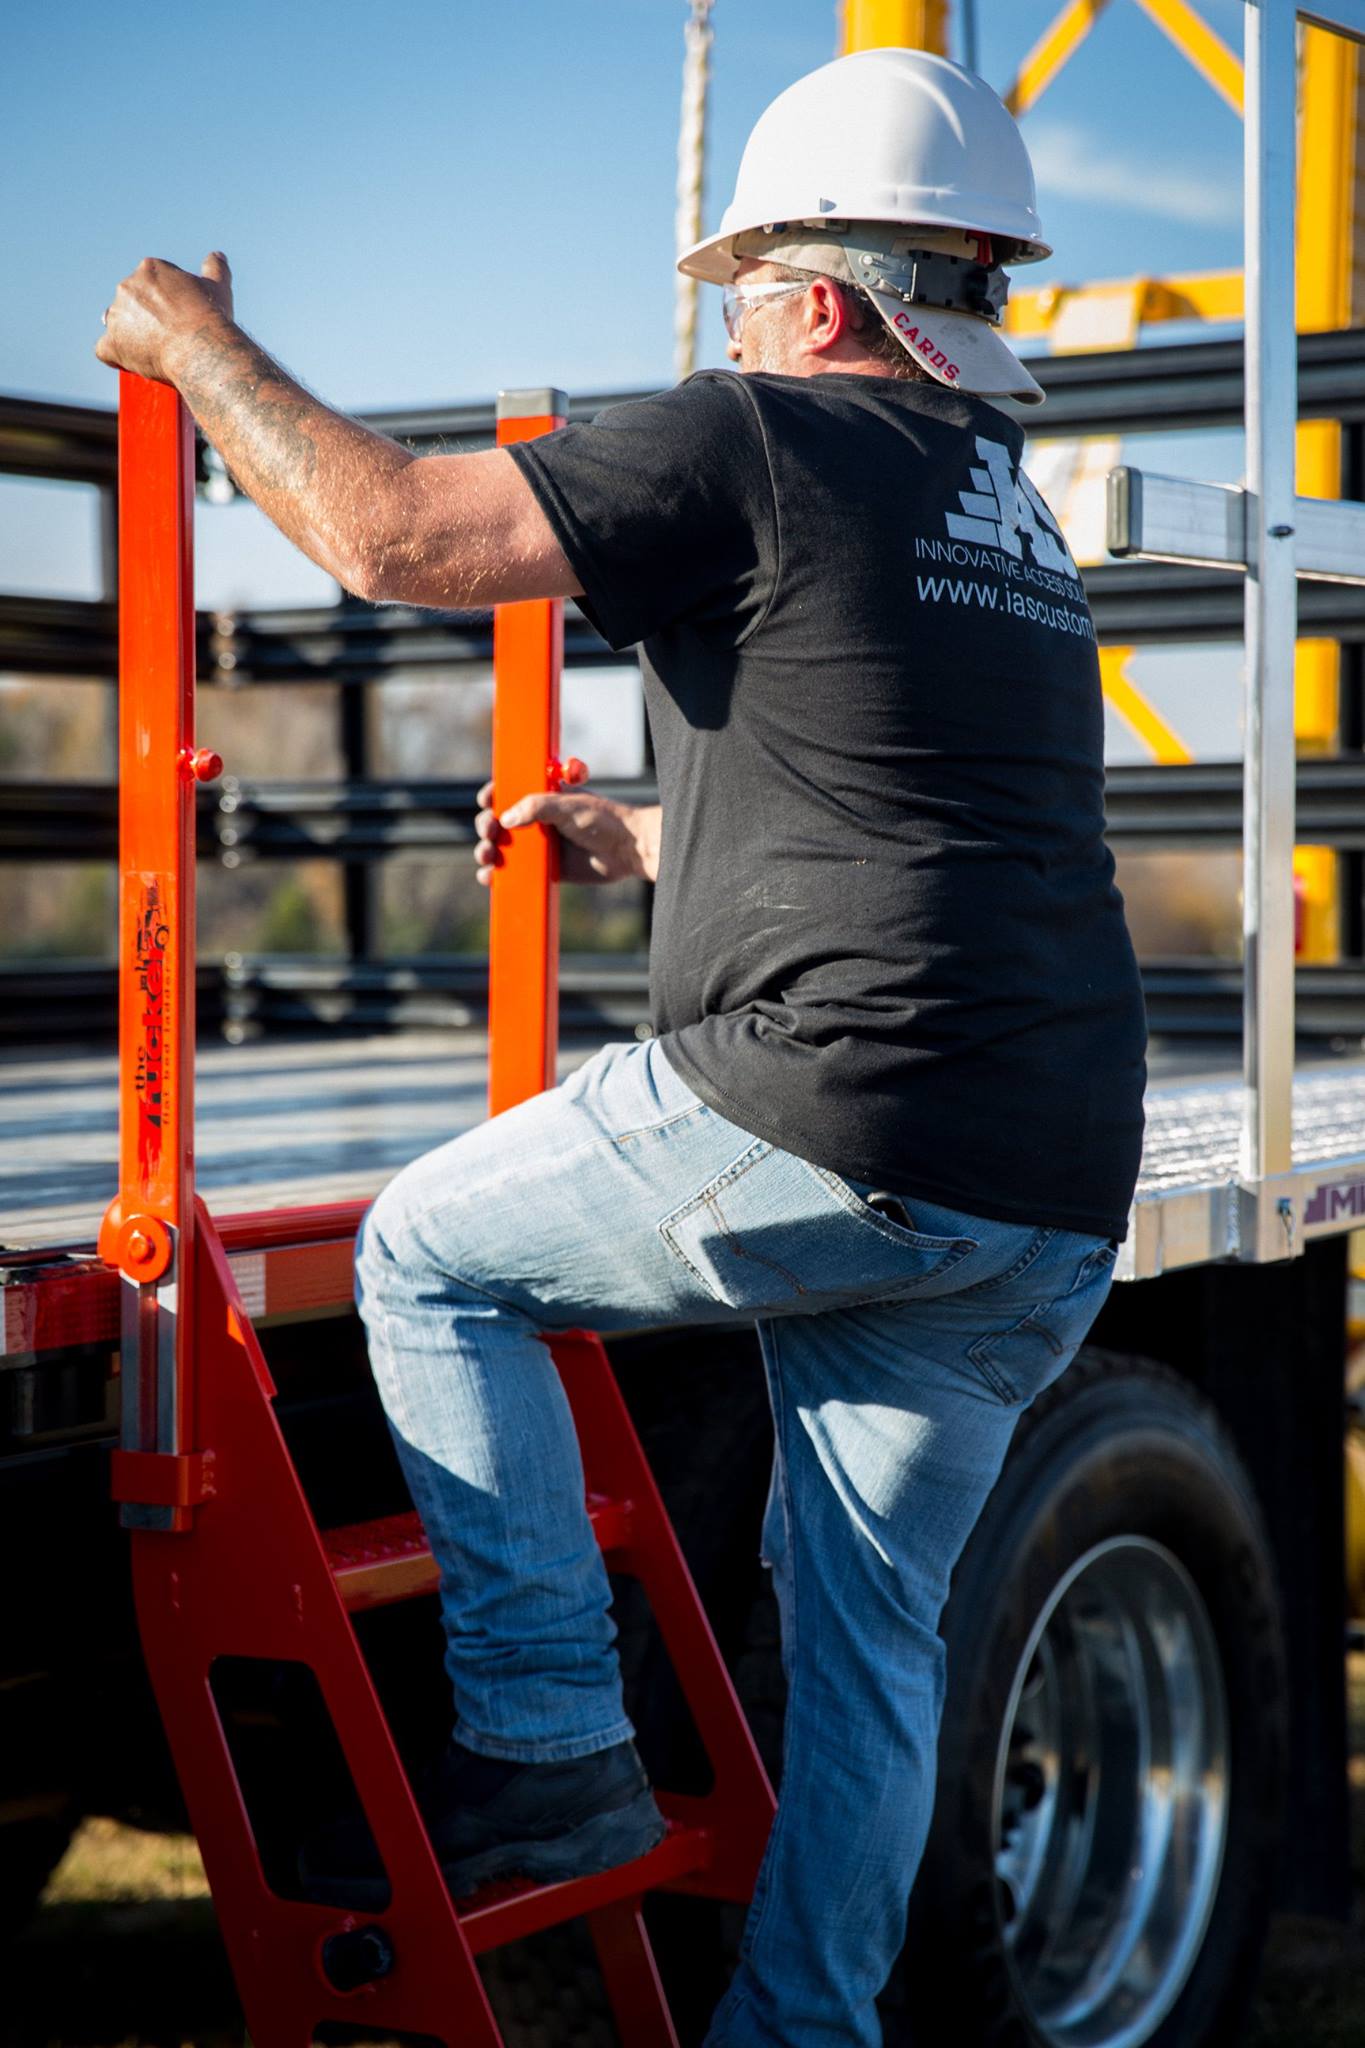 trucker i ladder flatbed trailer fall protection safety